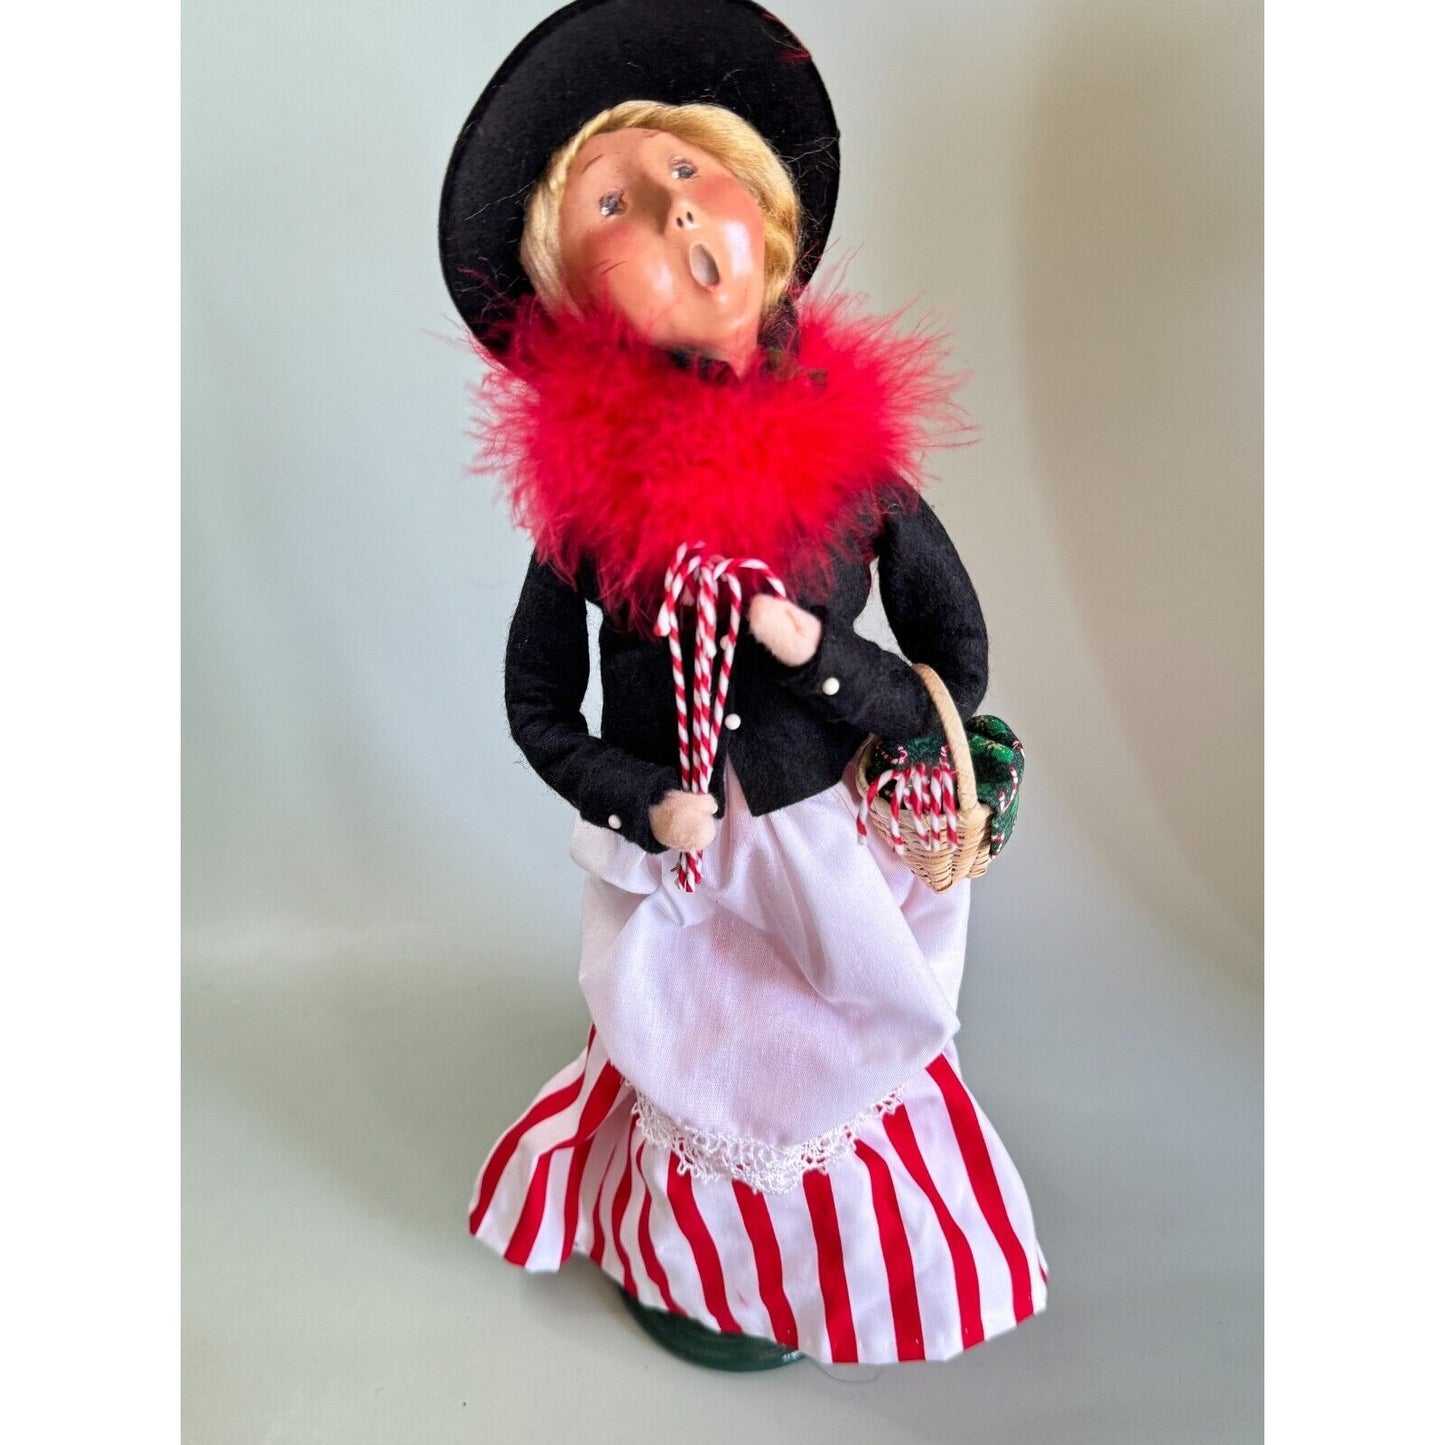 Byers Choice Winterthur Candy Cane Woman Girl Caroler with Box 13 3/4" 2005